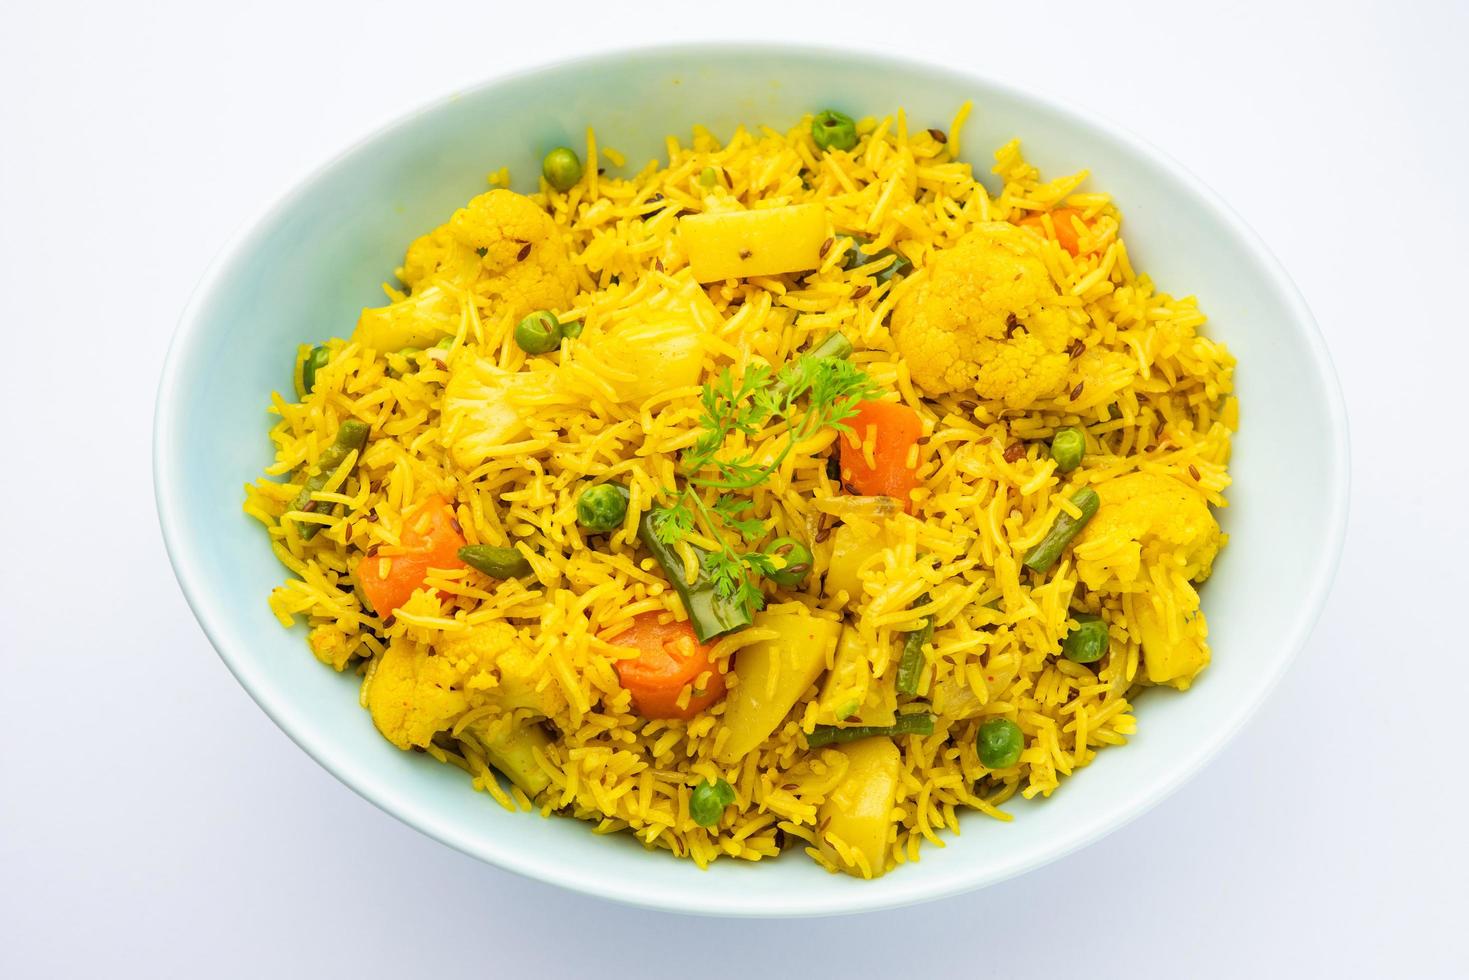 Tahri, tehri, tehiri or tahari is an Indian one pot meal made using mixed Vegetables and Rice photo